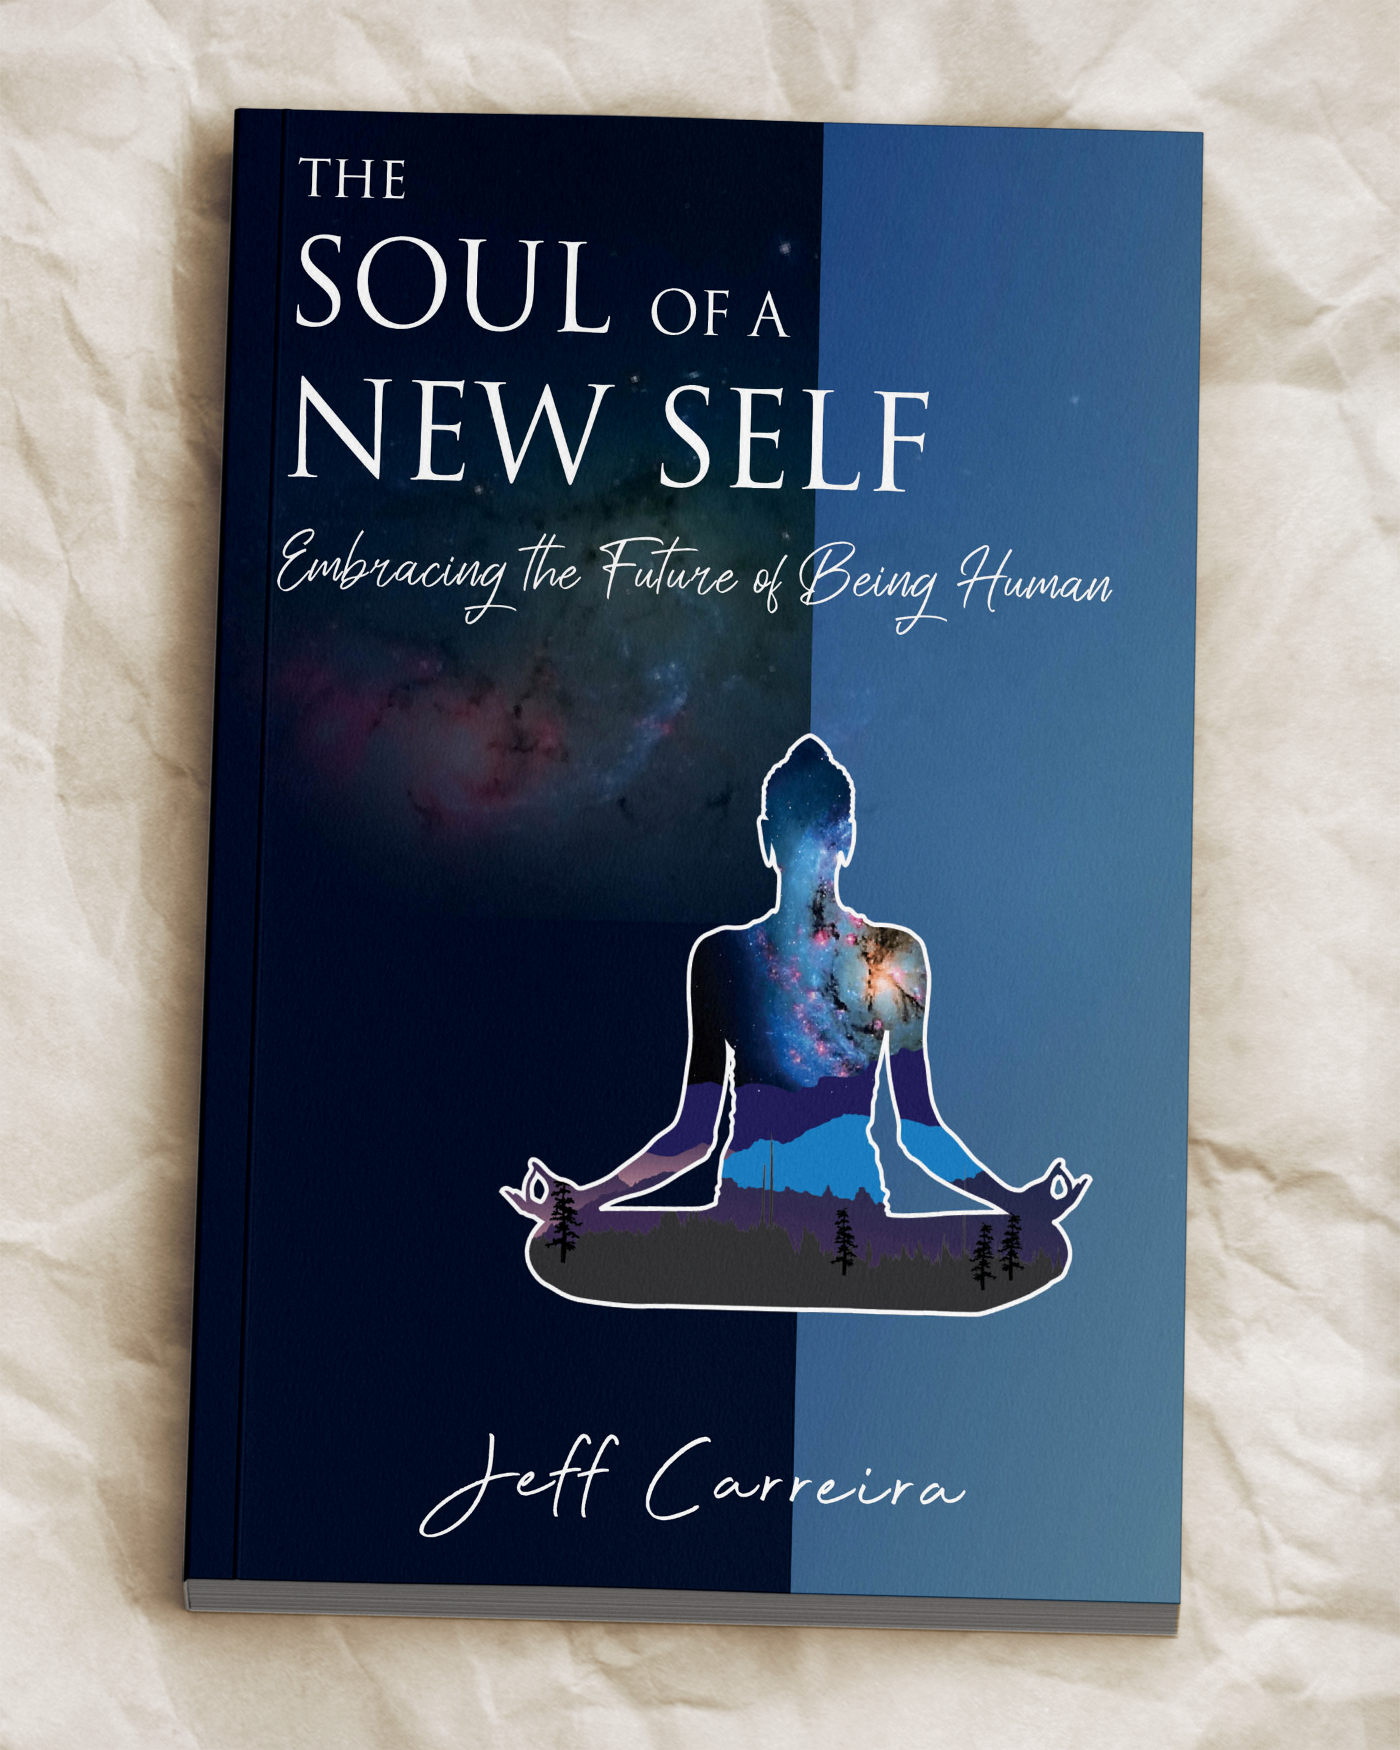 The Soul's Journey to Wholeness: Illuminating the Higher Realms of Spi –  The Official Bookstore of Jeff Carreira